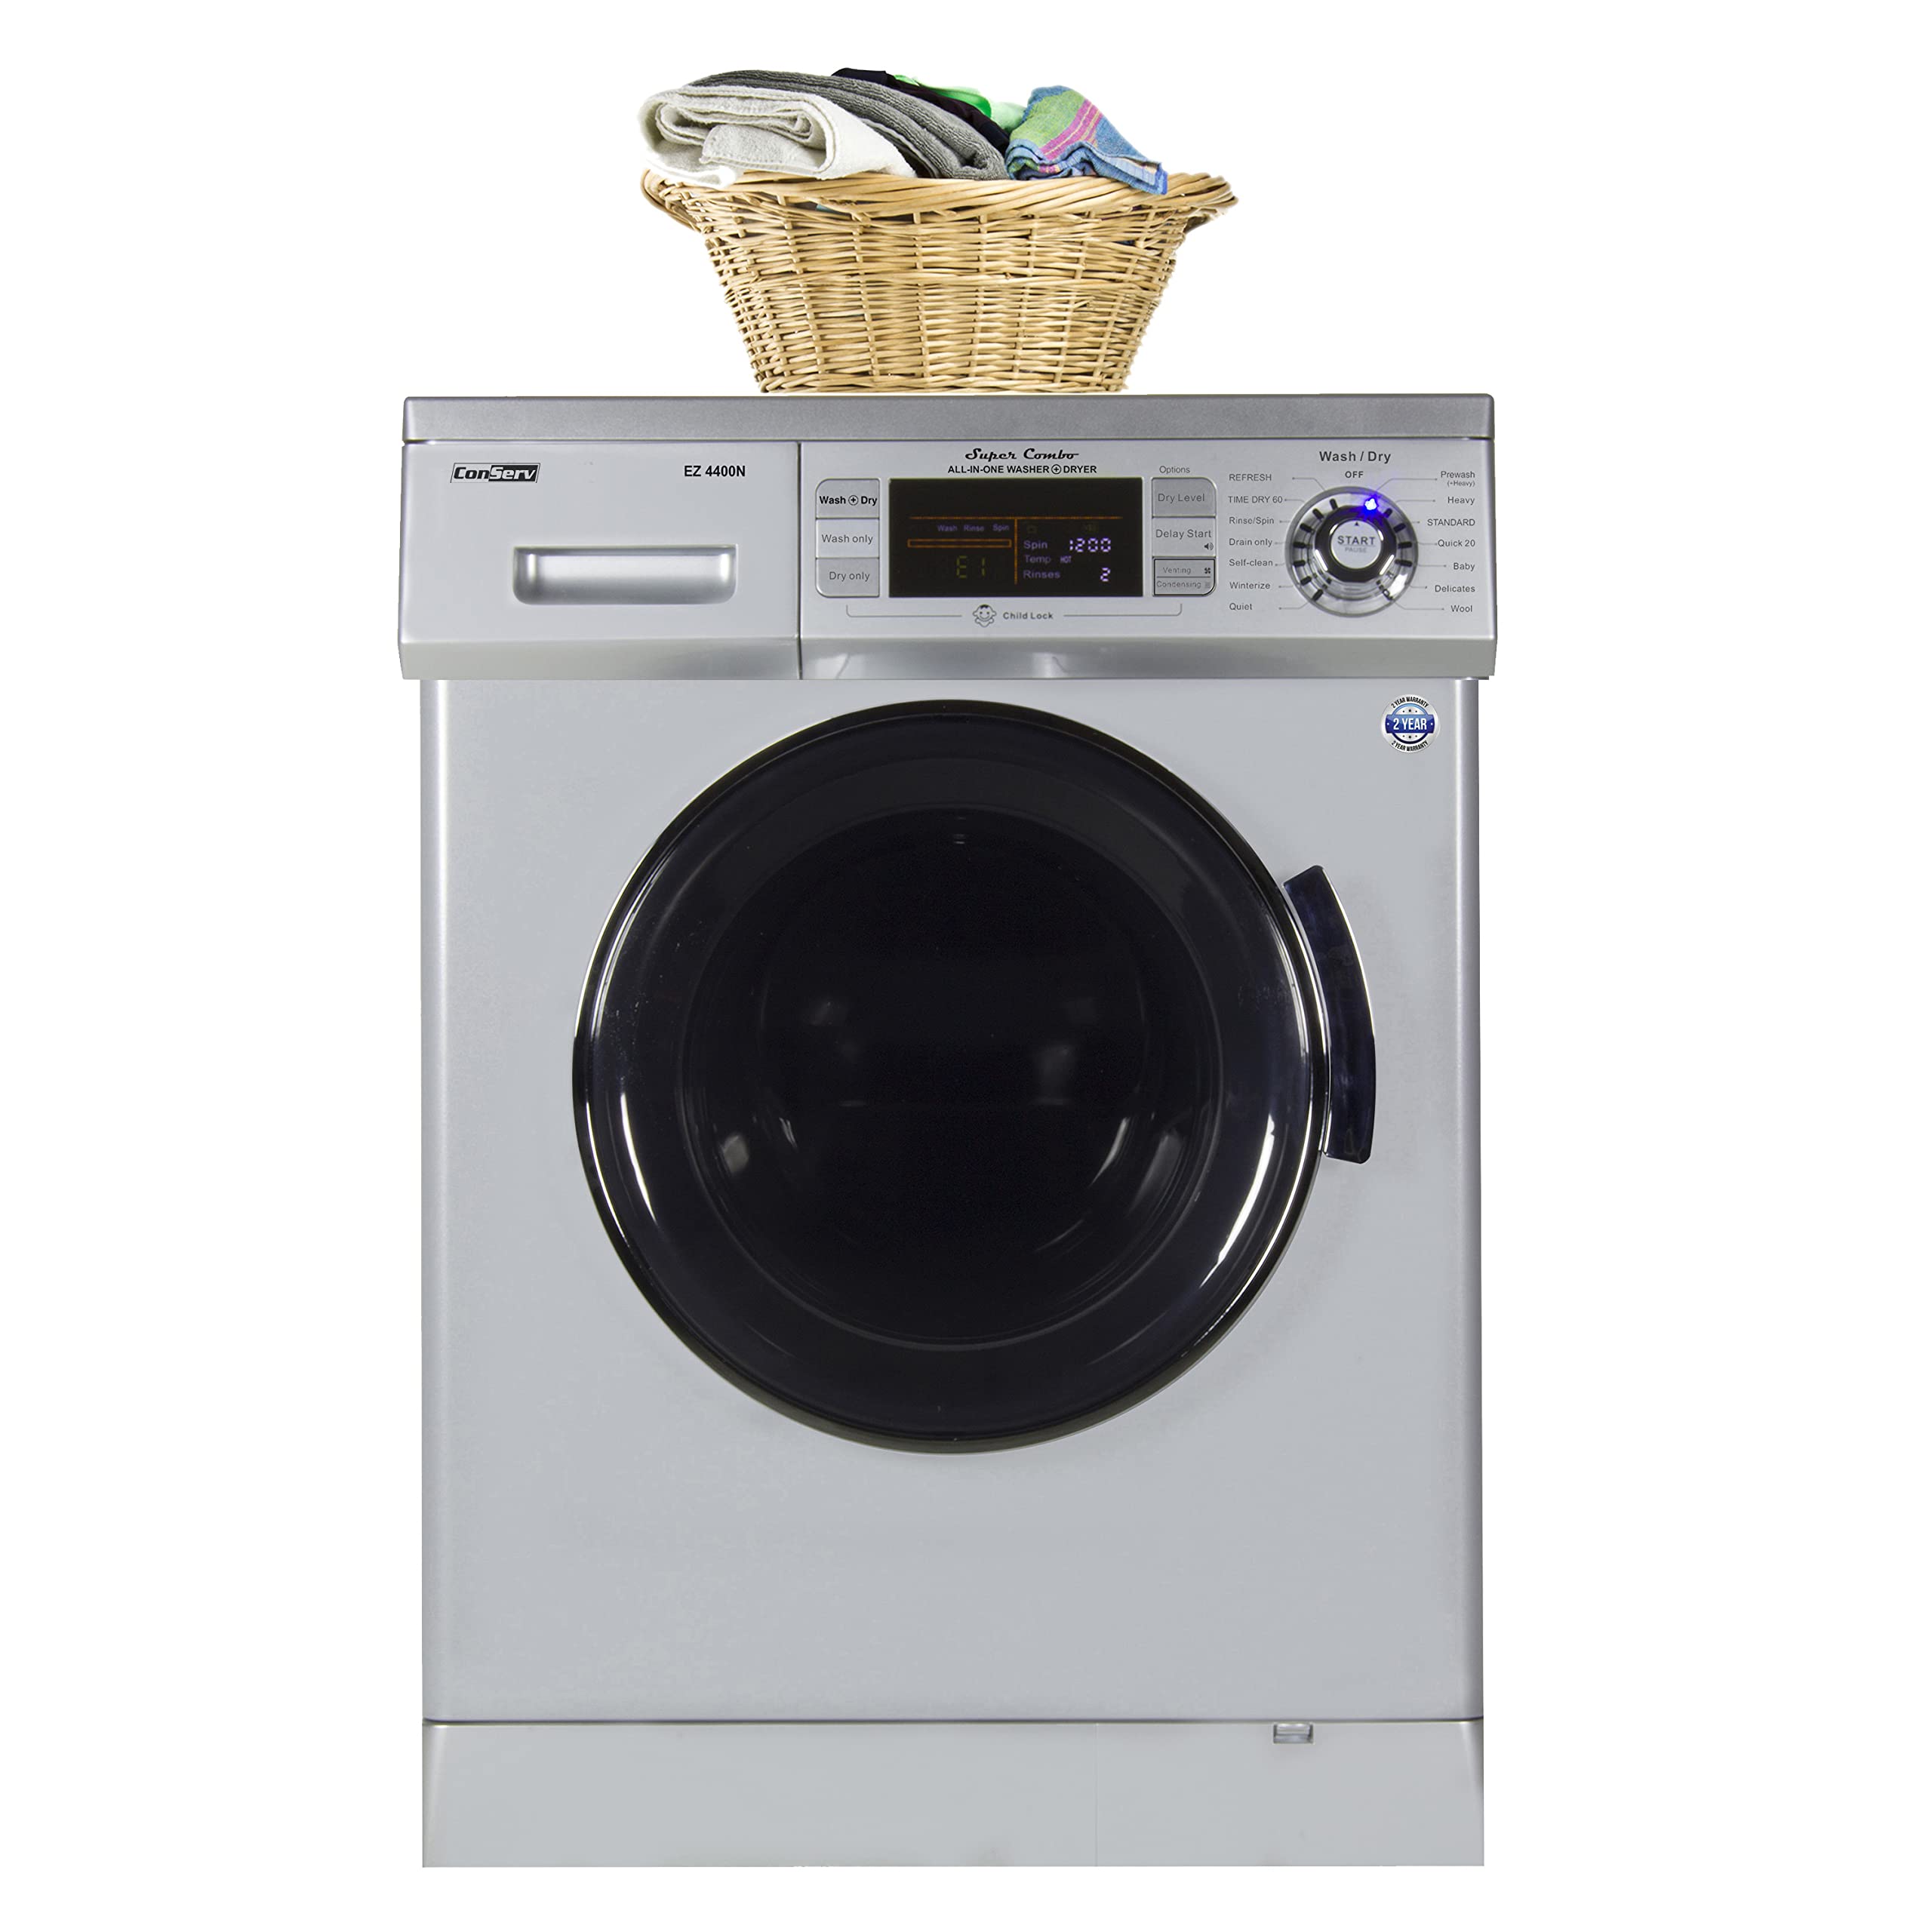 Conserv Pro Compact 110V Vented/Ventless 13 lbs Combo Washer Sensor Dry 1200 RPM Silver